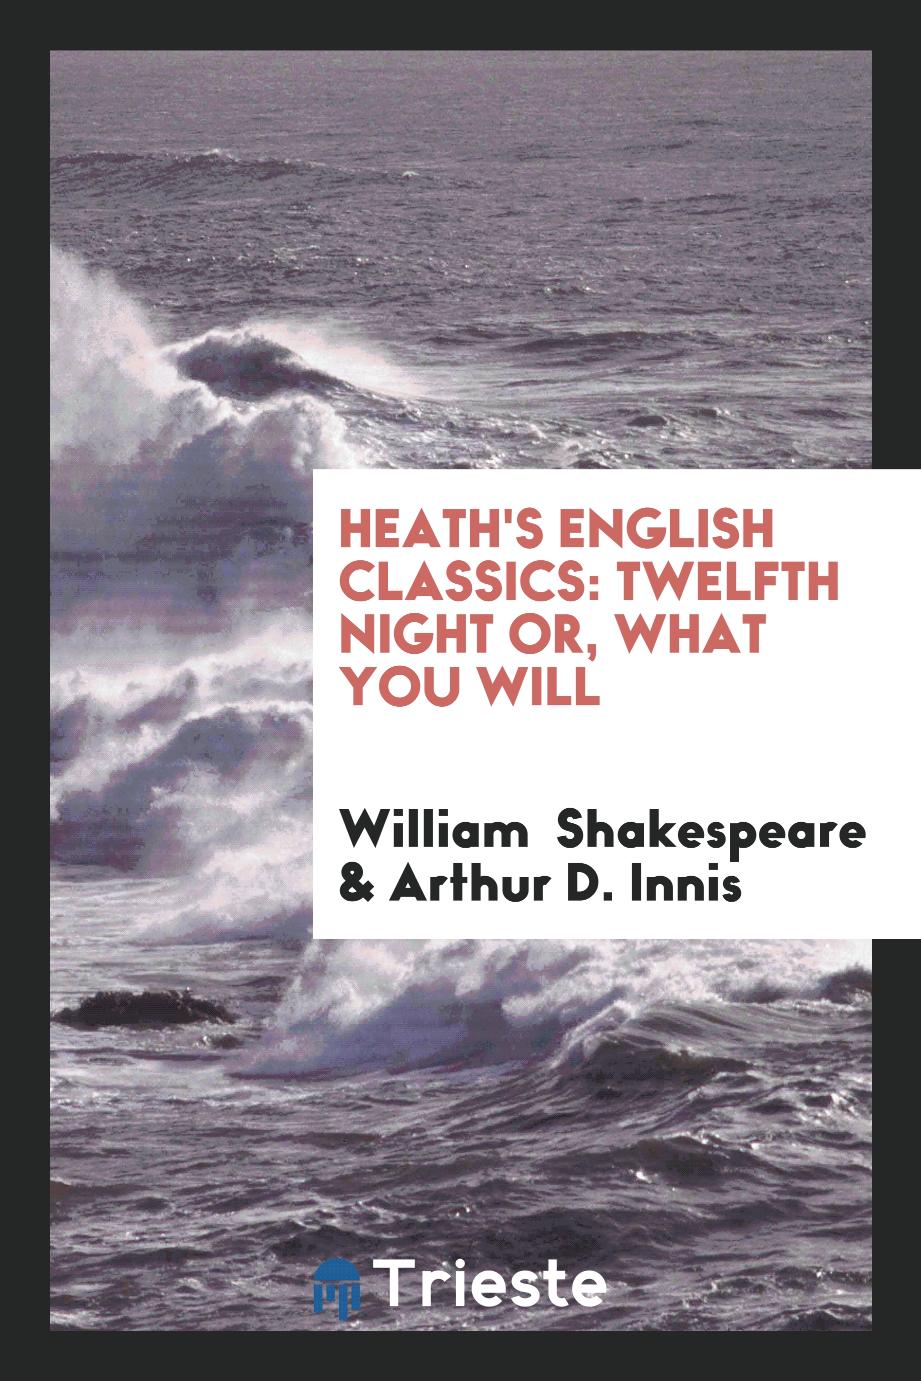 Heath's English Classics: Twelfth Night or, What You Will